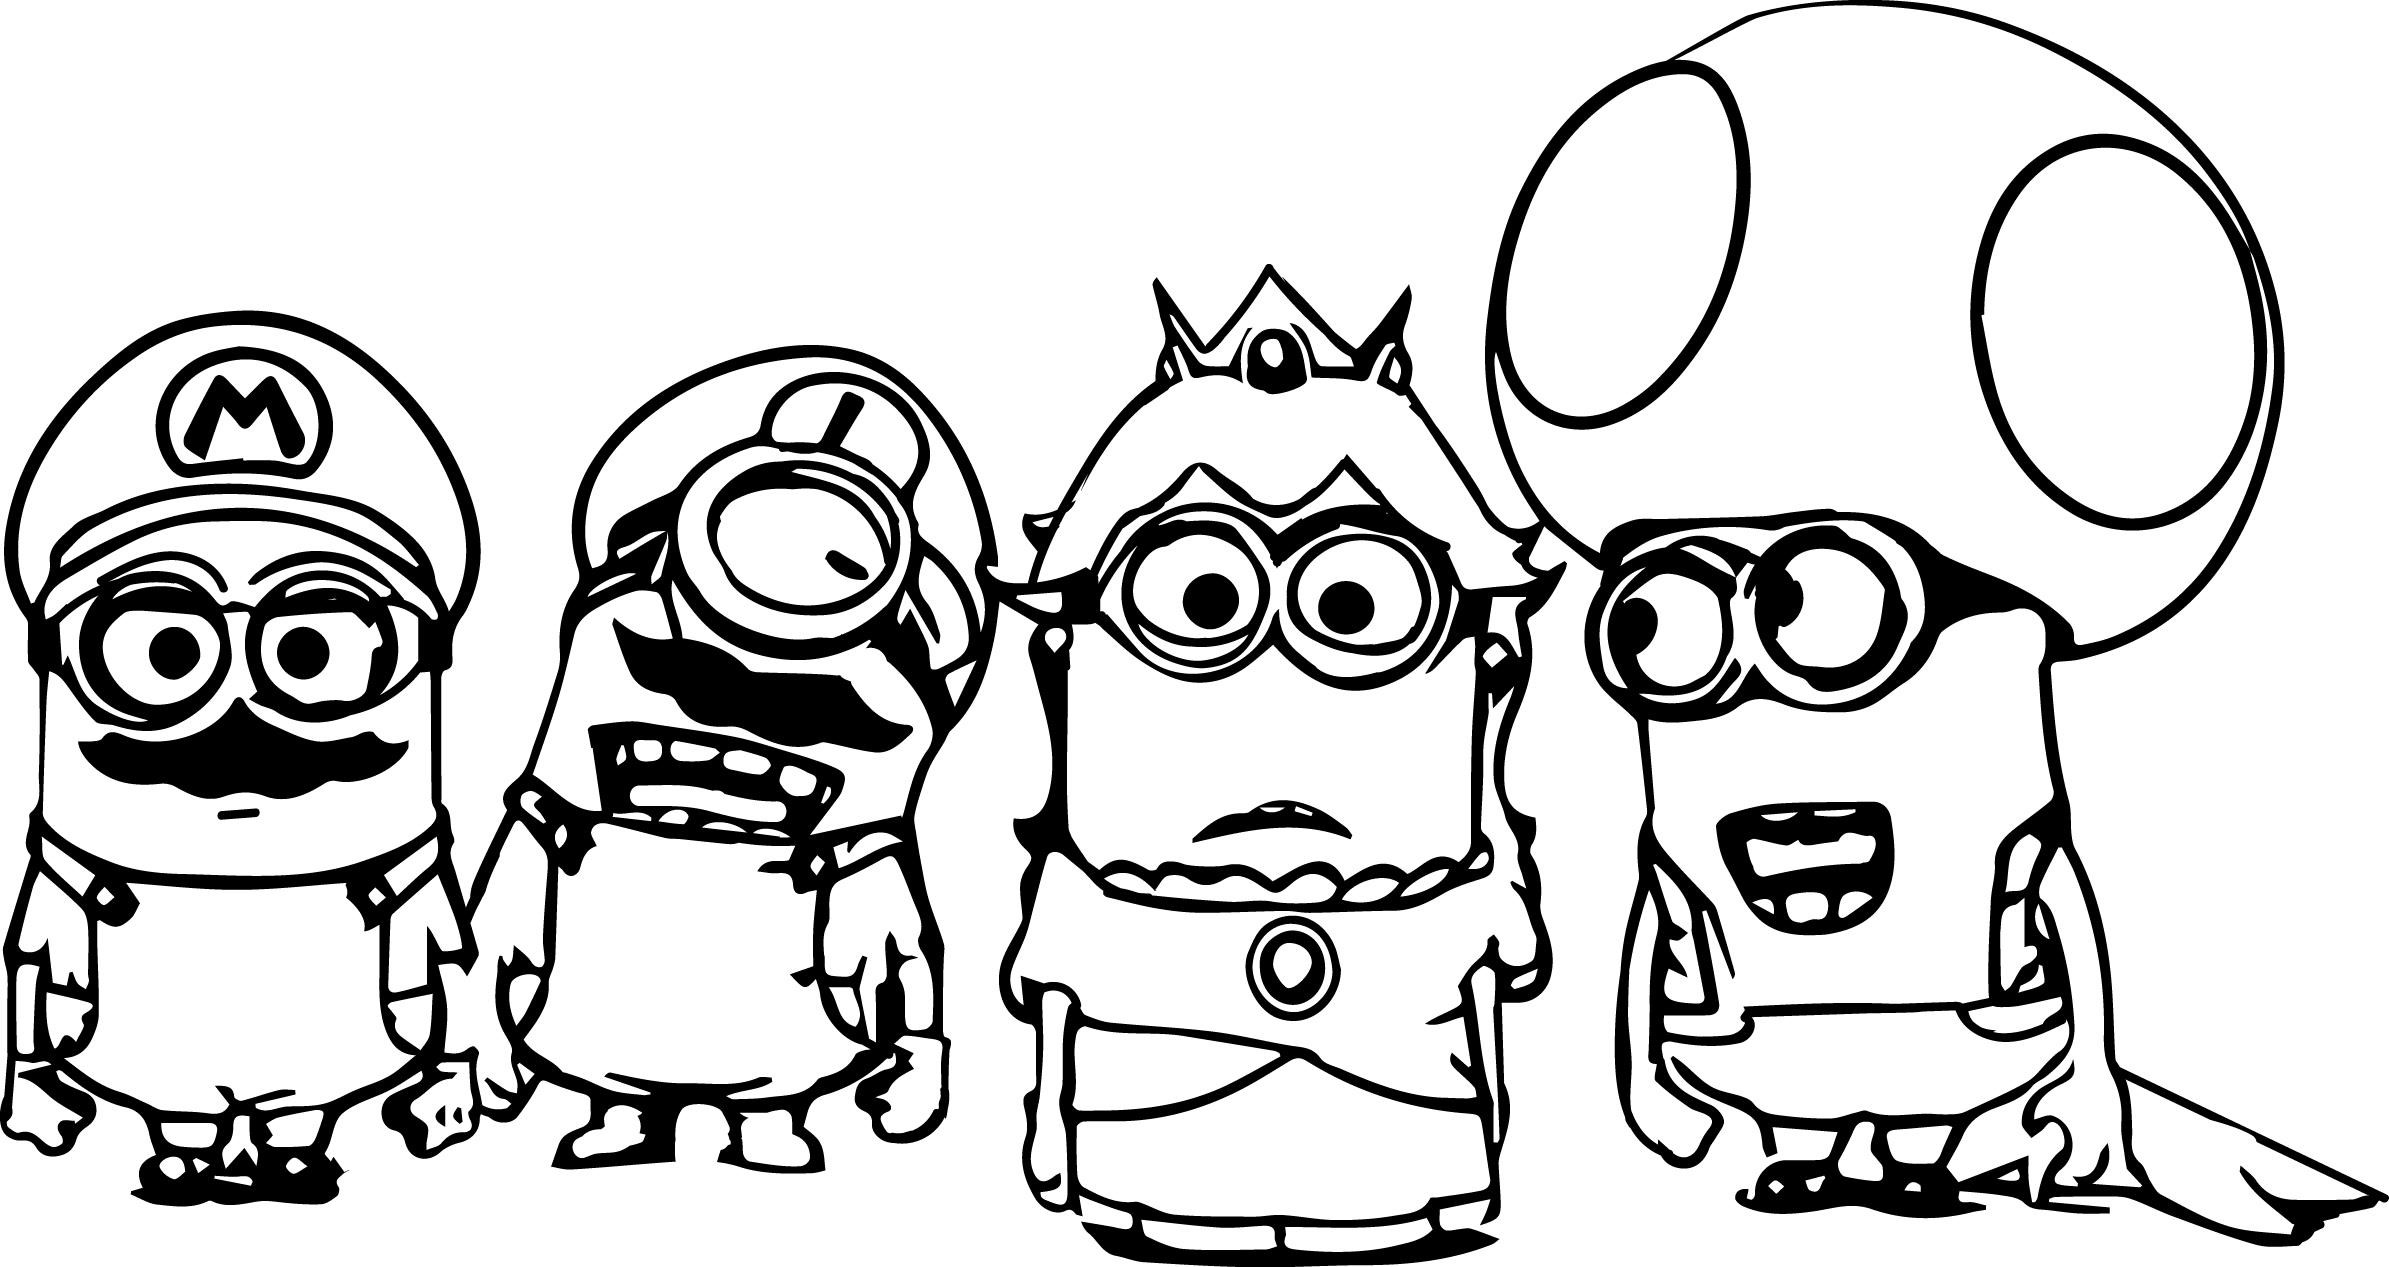 Minions-Coloring-Pages